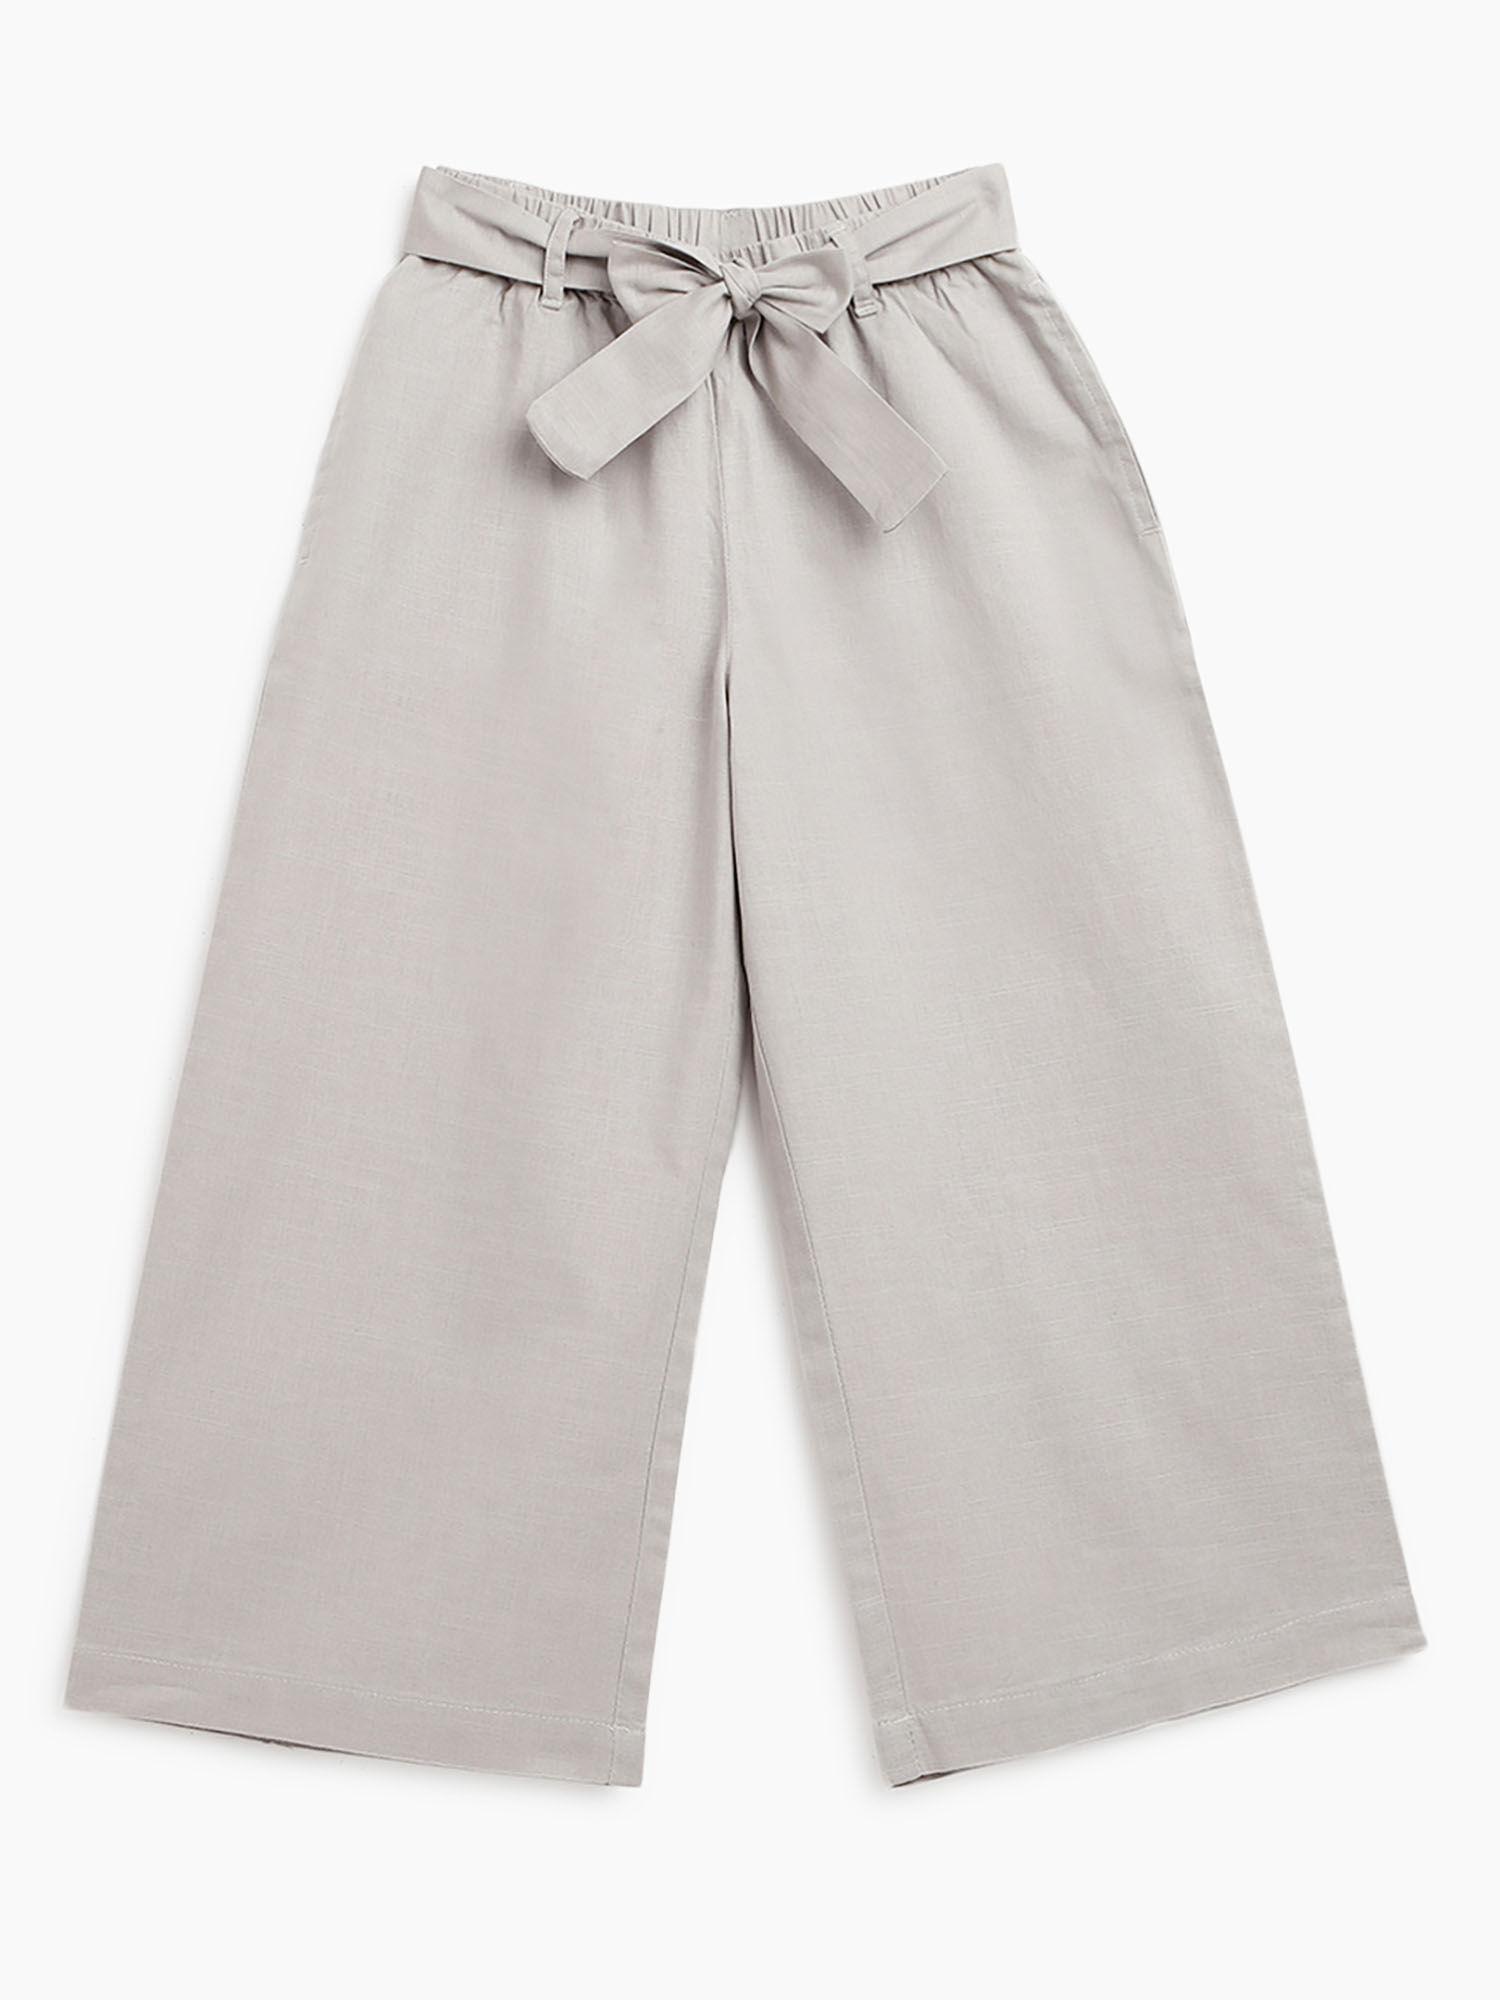 girls grey chelsea cotton culottes trousers with belt (set of 2)